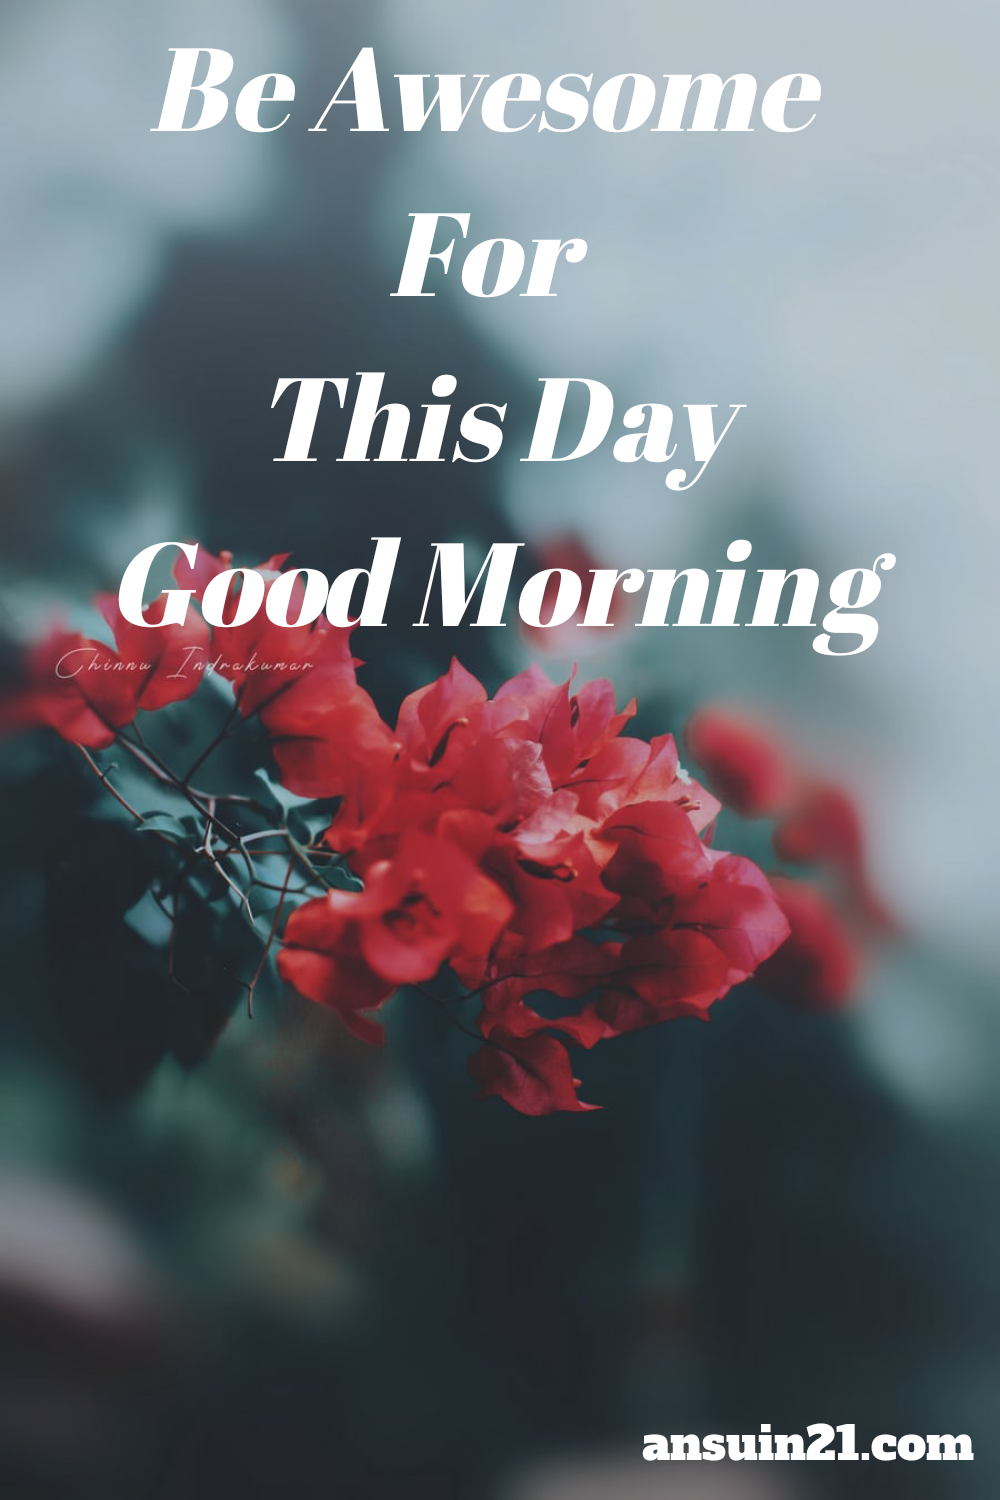 Best Good Morning HD Images, Wishes, Status for whatsaap HD Wallpaper free download,